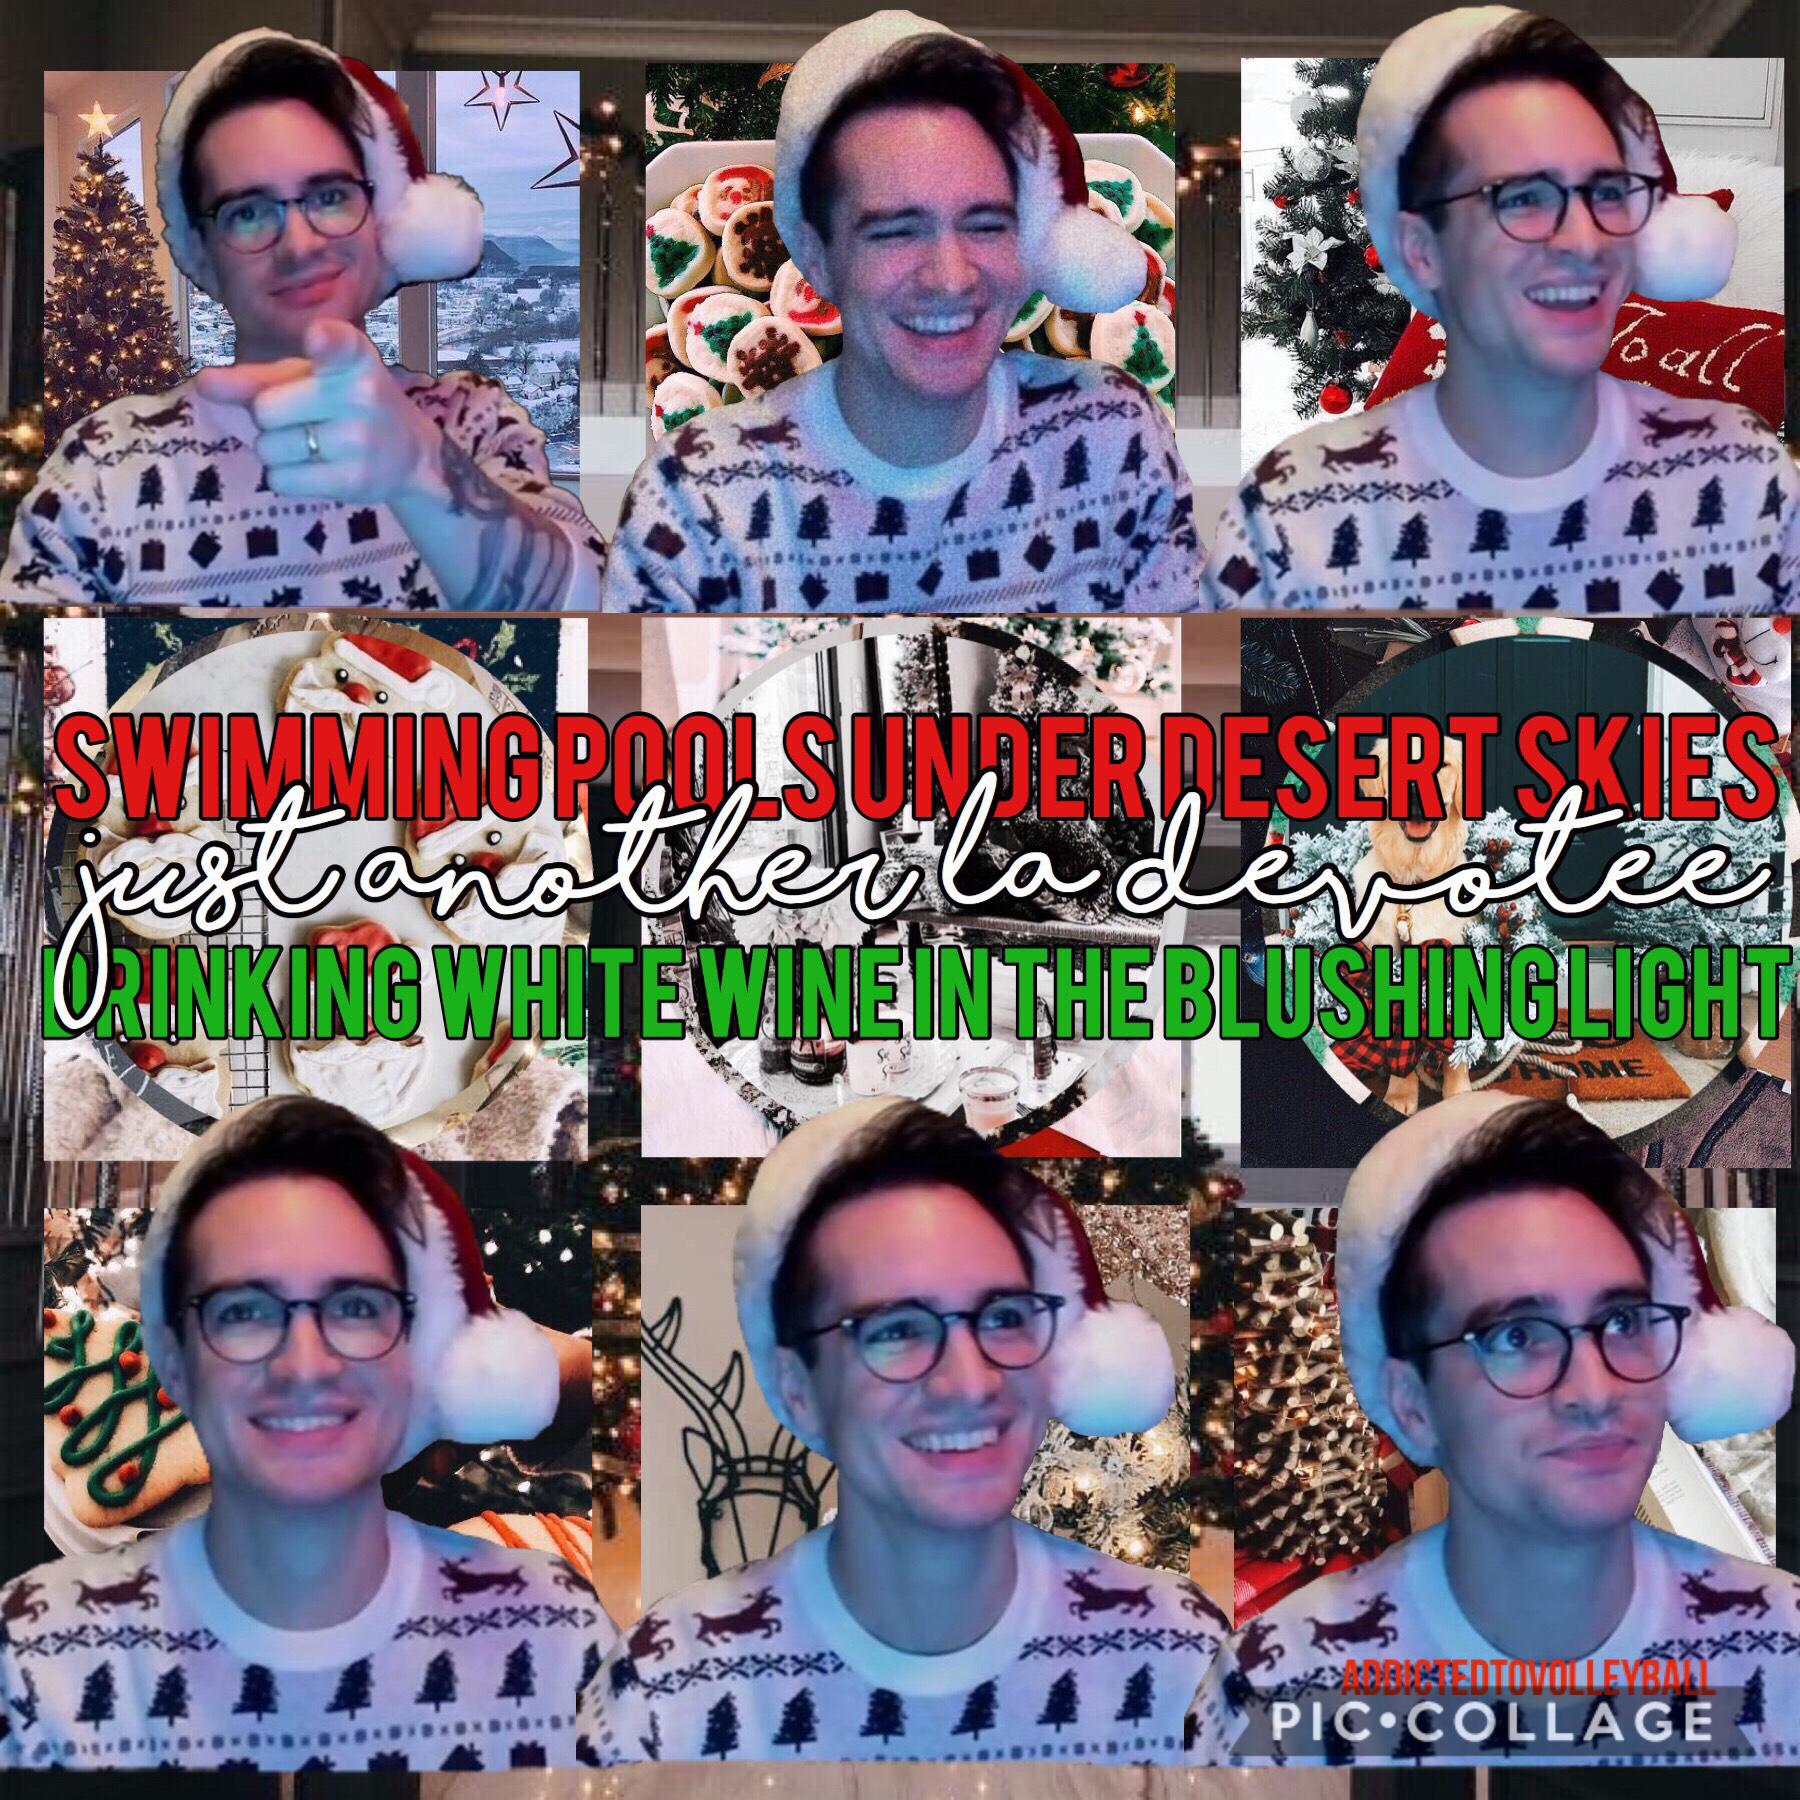 12-28-18 - brendon! ♥️ - click!
two posts in one day wHaT
why am i more festive AFTER christmas? 😂🤦🏼‍♀️ 
i’ve been listening to panic! for 12 HOURS STRAIGHT 😂😂😂
QOTD: favorite p!atd song?
AOTD: la devotee or say amen (saturday night) ♥️